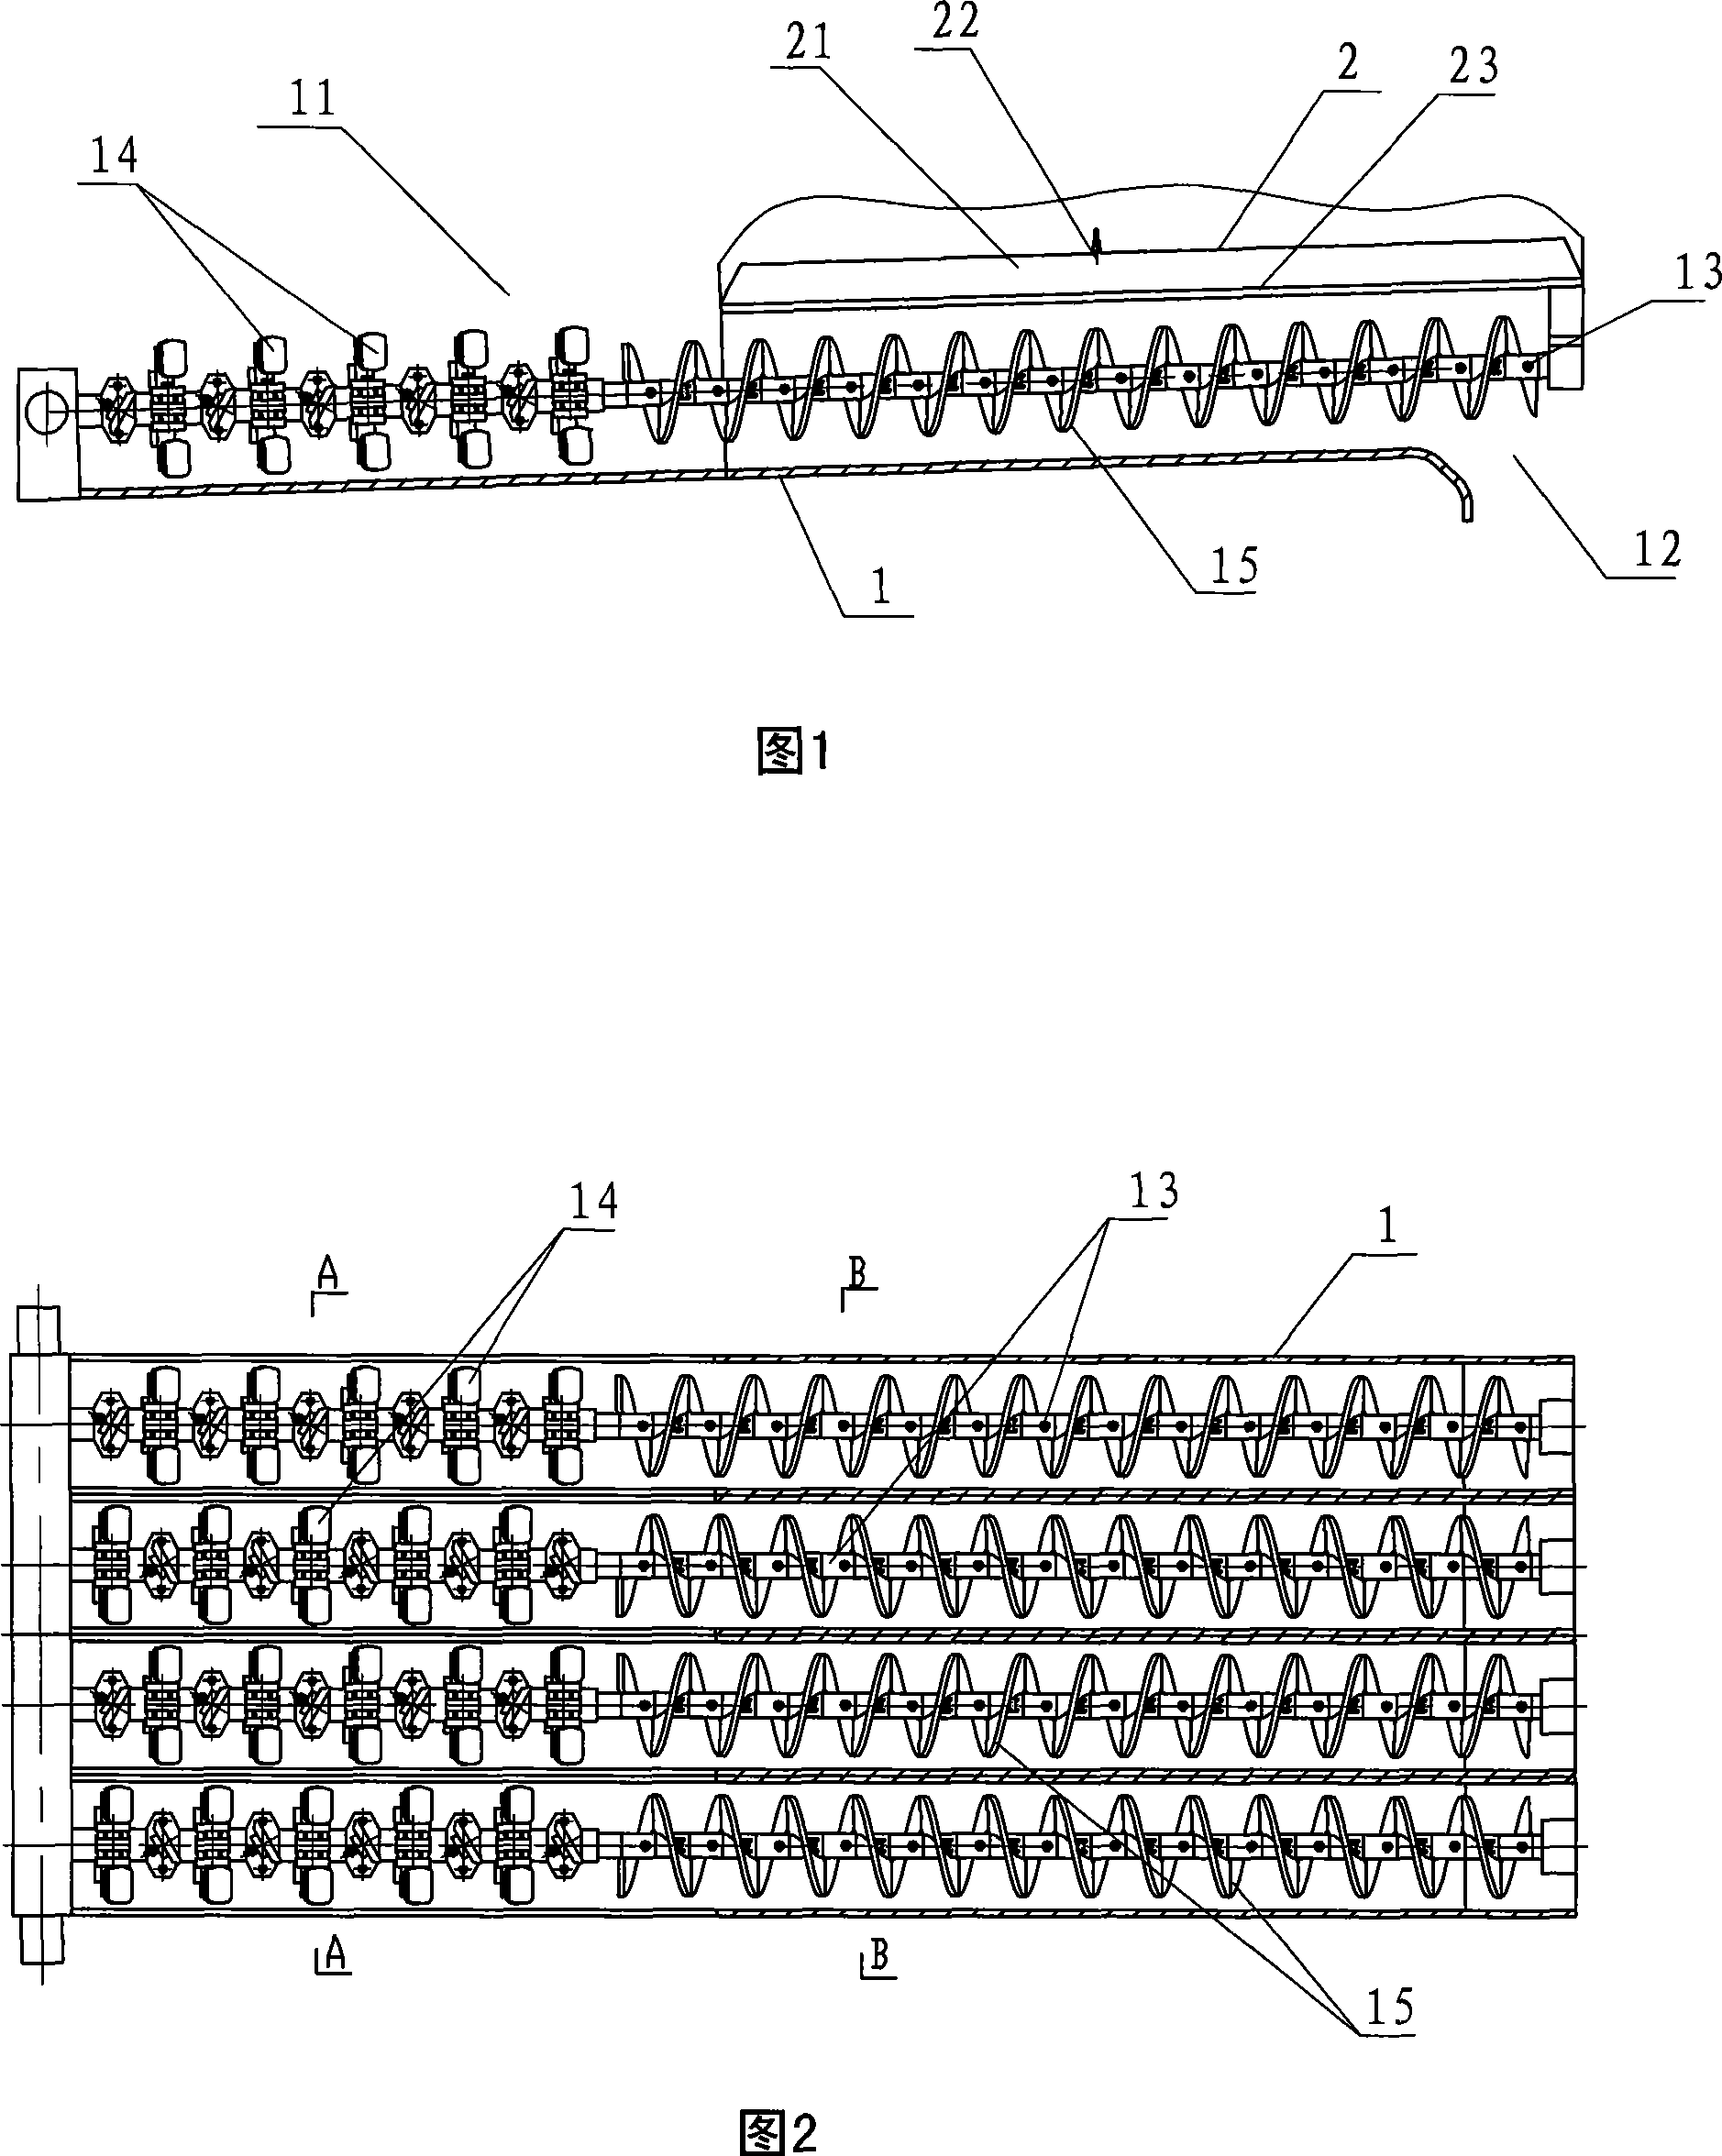 Material transferring system for spreading machine